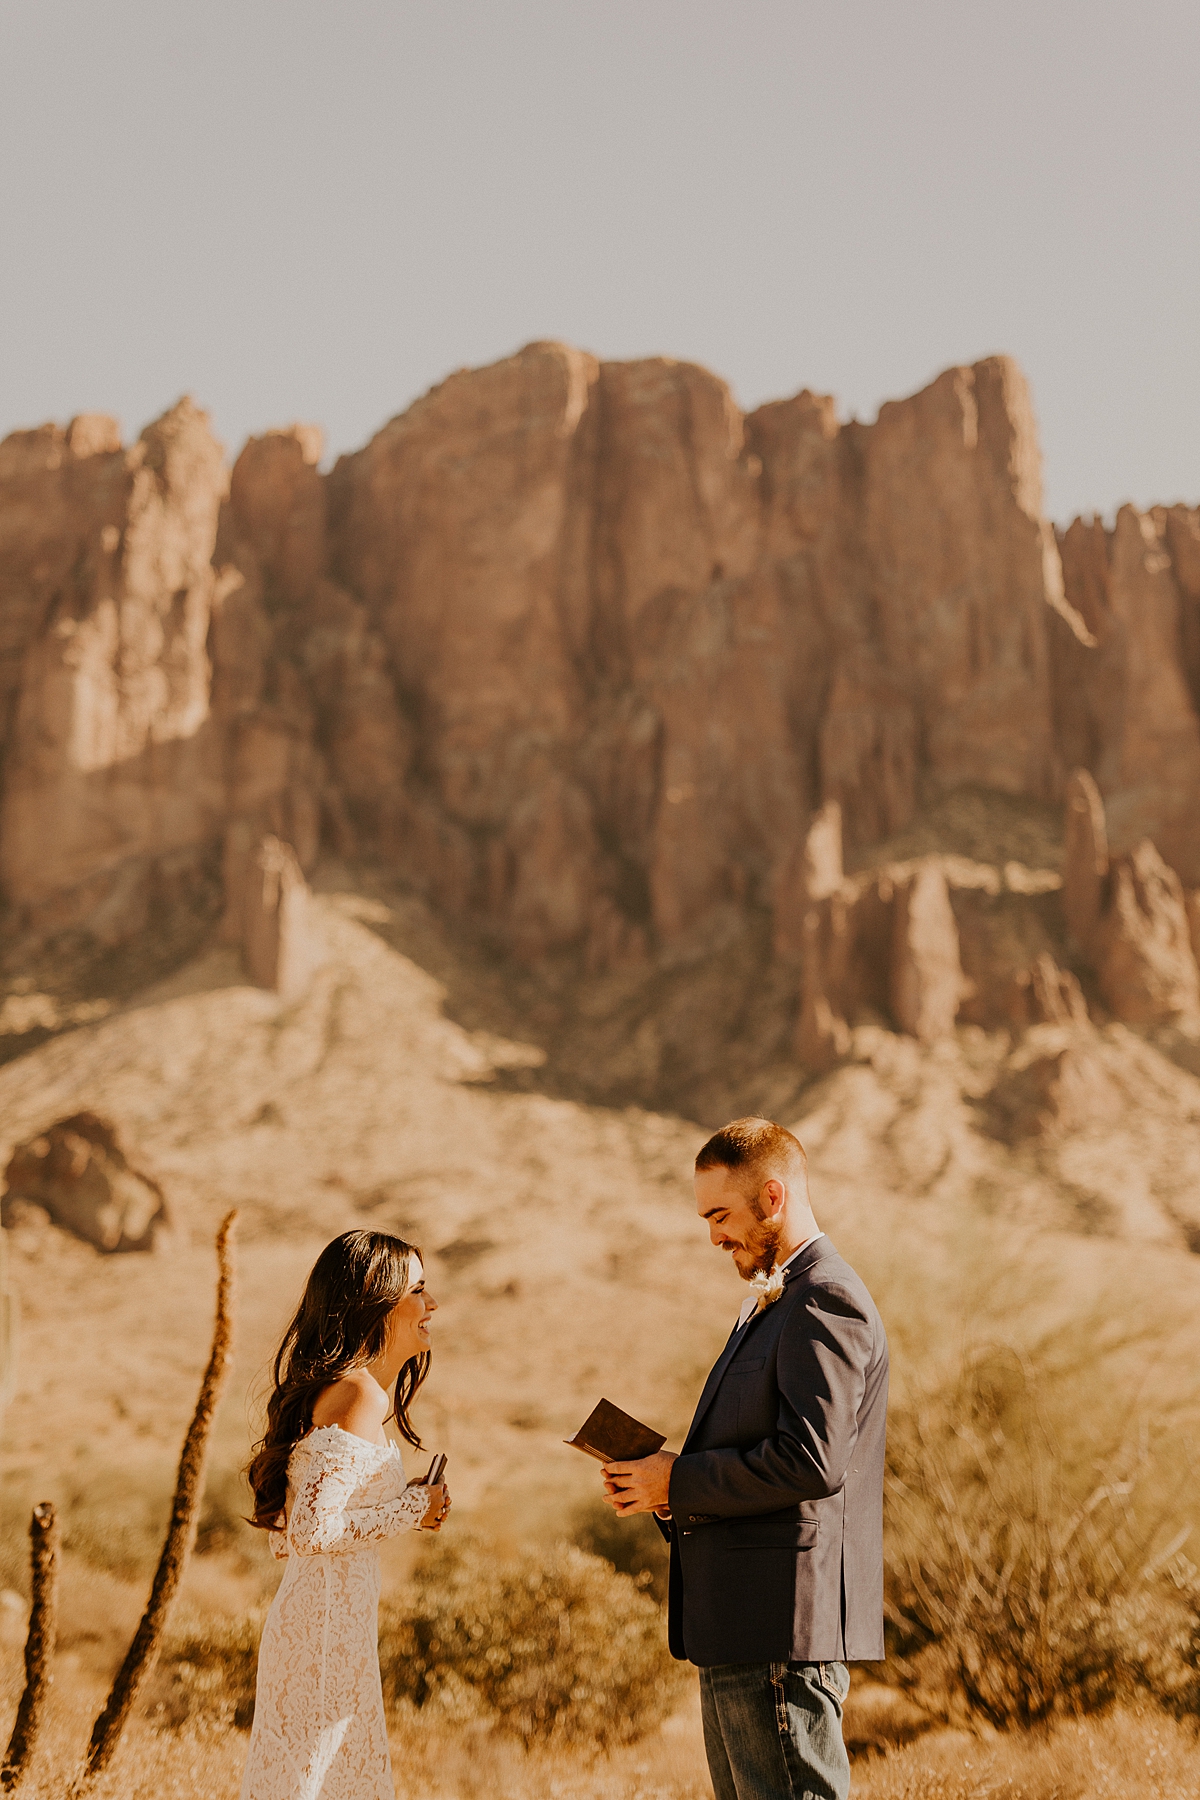 Intimate-elopement-in-superstition-mountain-wilderness-allison-slater-photography21.jpg